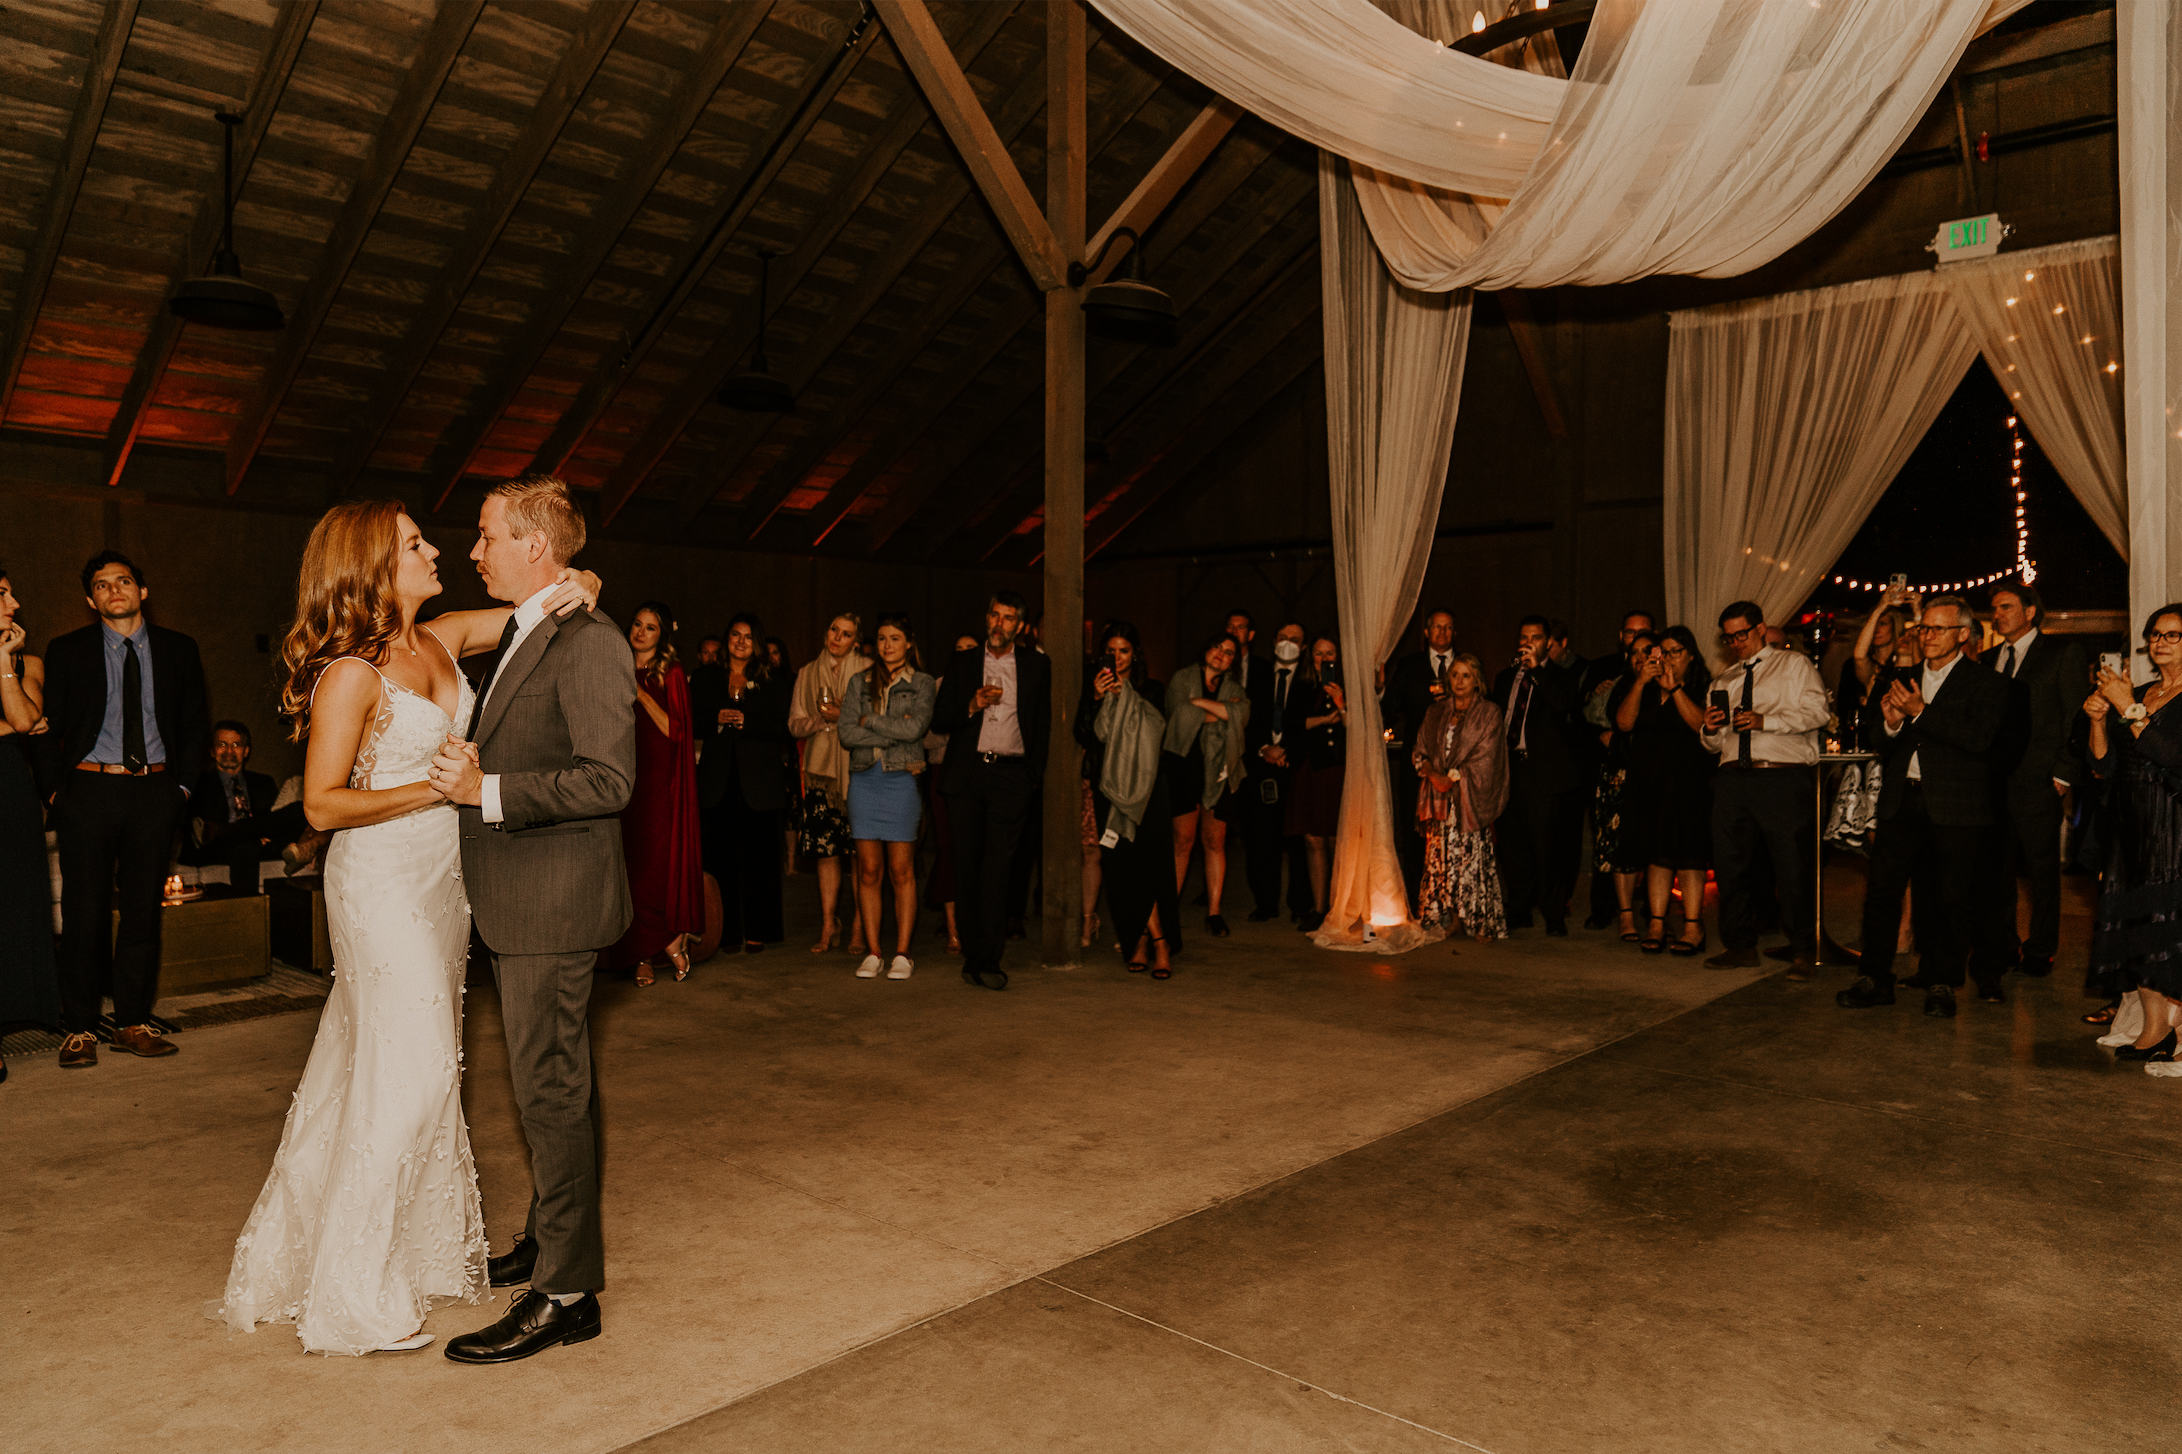 www.santabarbarawedding.com | Allison Slater Photography  | Greengate Ranch | Alicia Falango | Islay Events | Anna Le Pley Taylor | The Queen’s Bees | Couple Dancing at Reception